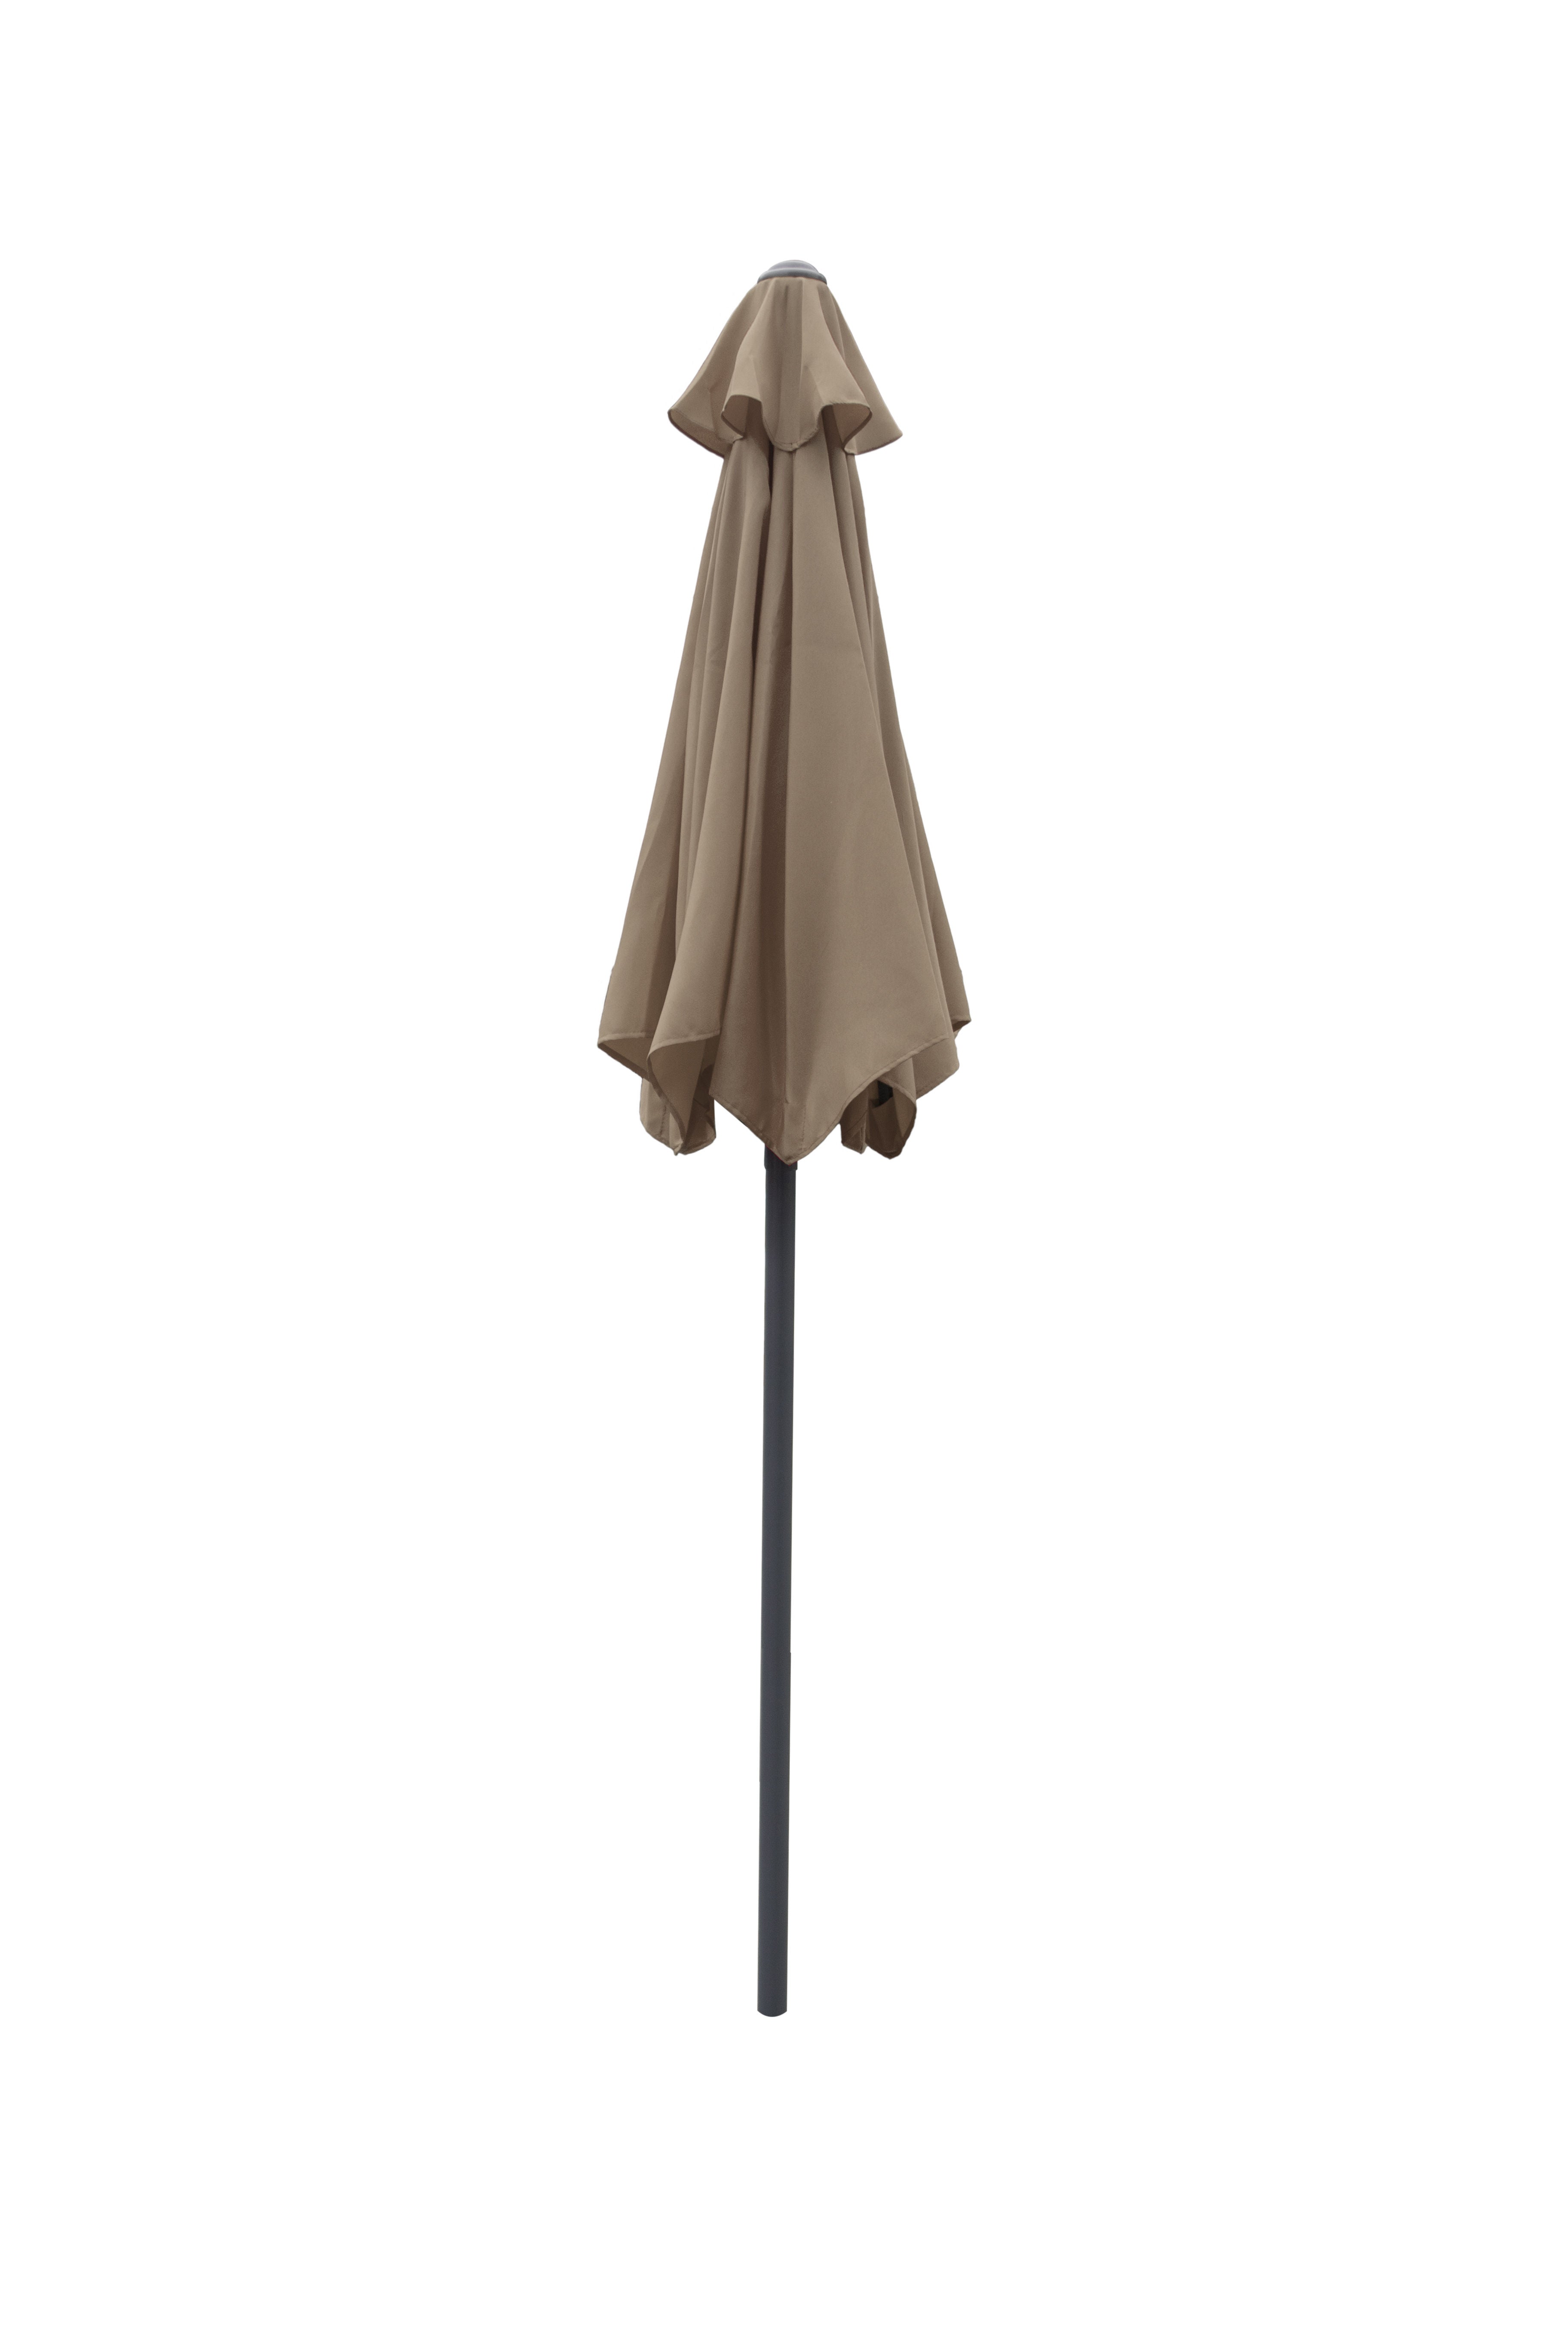 7' Tilting market umbrella, w/out base, cover included SAND